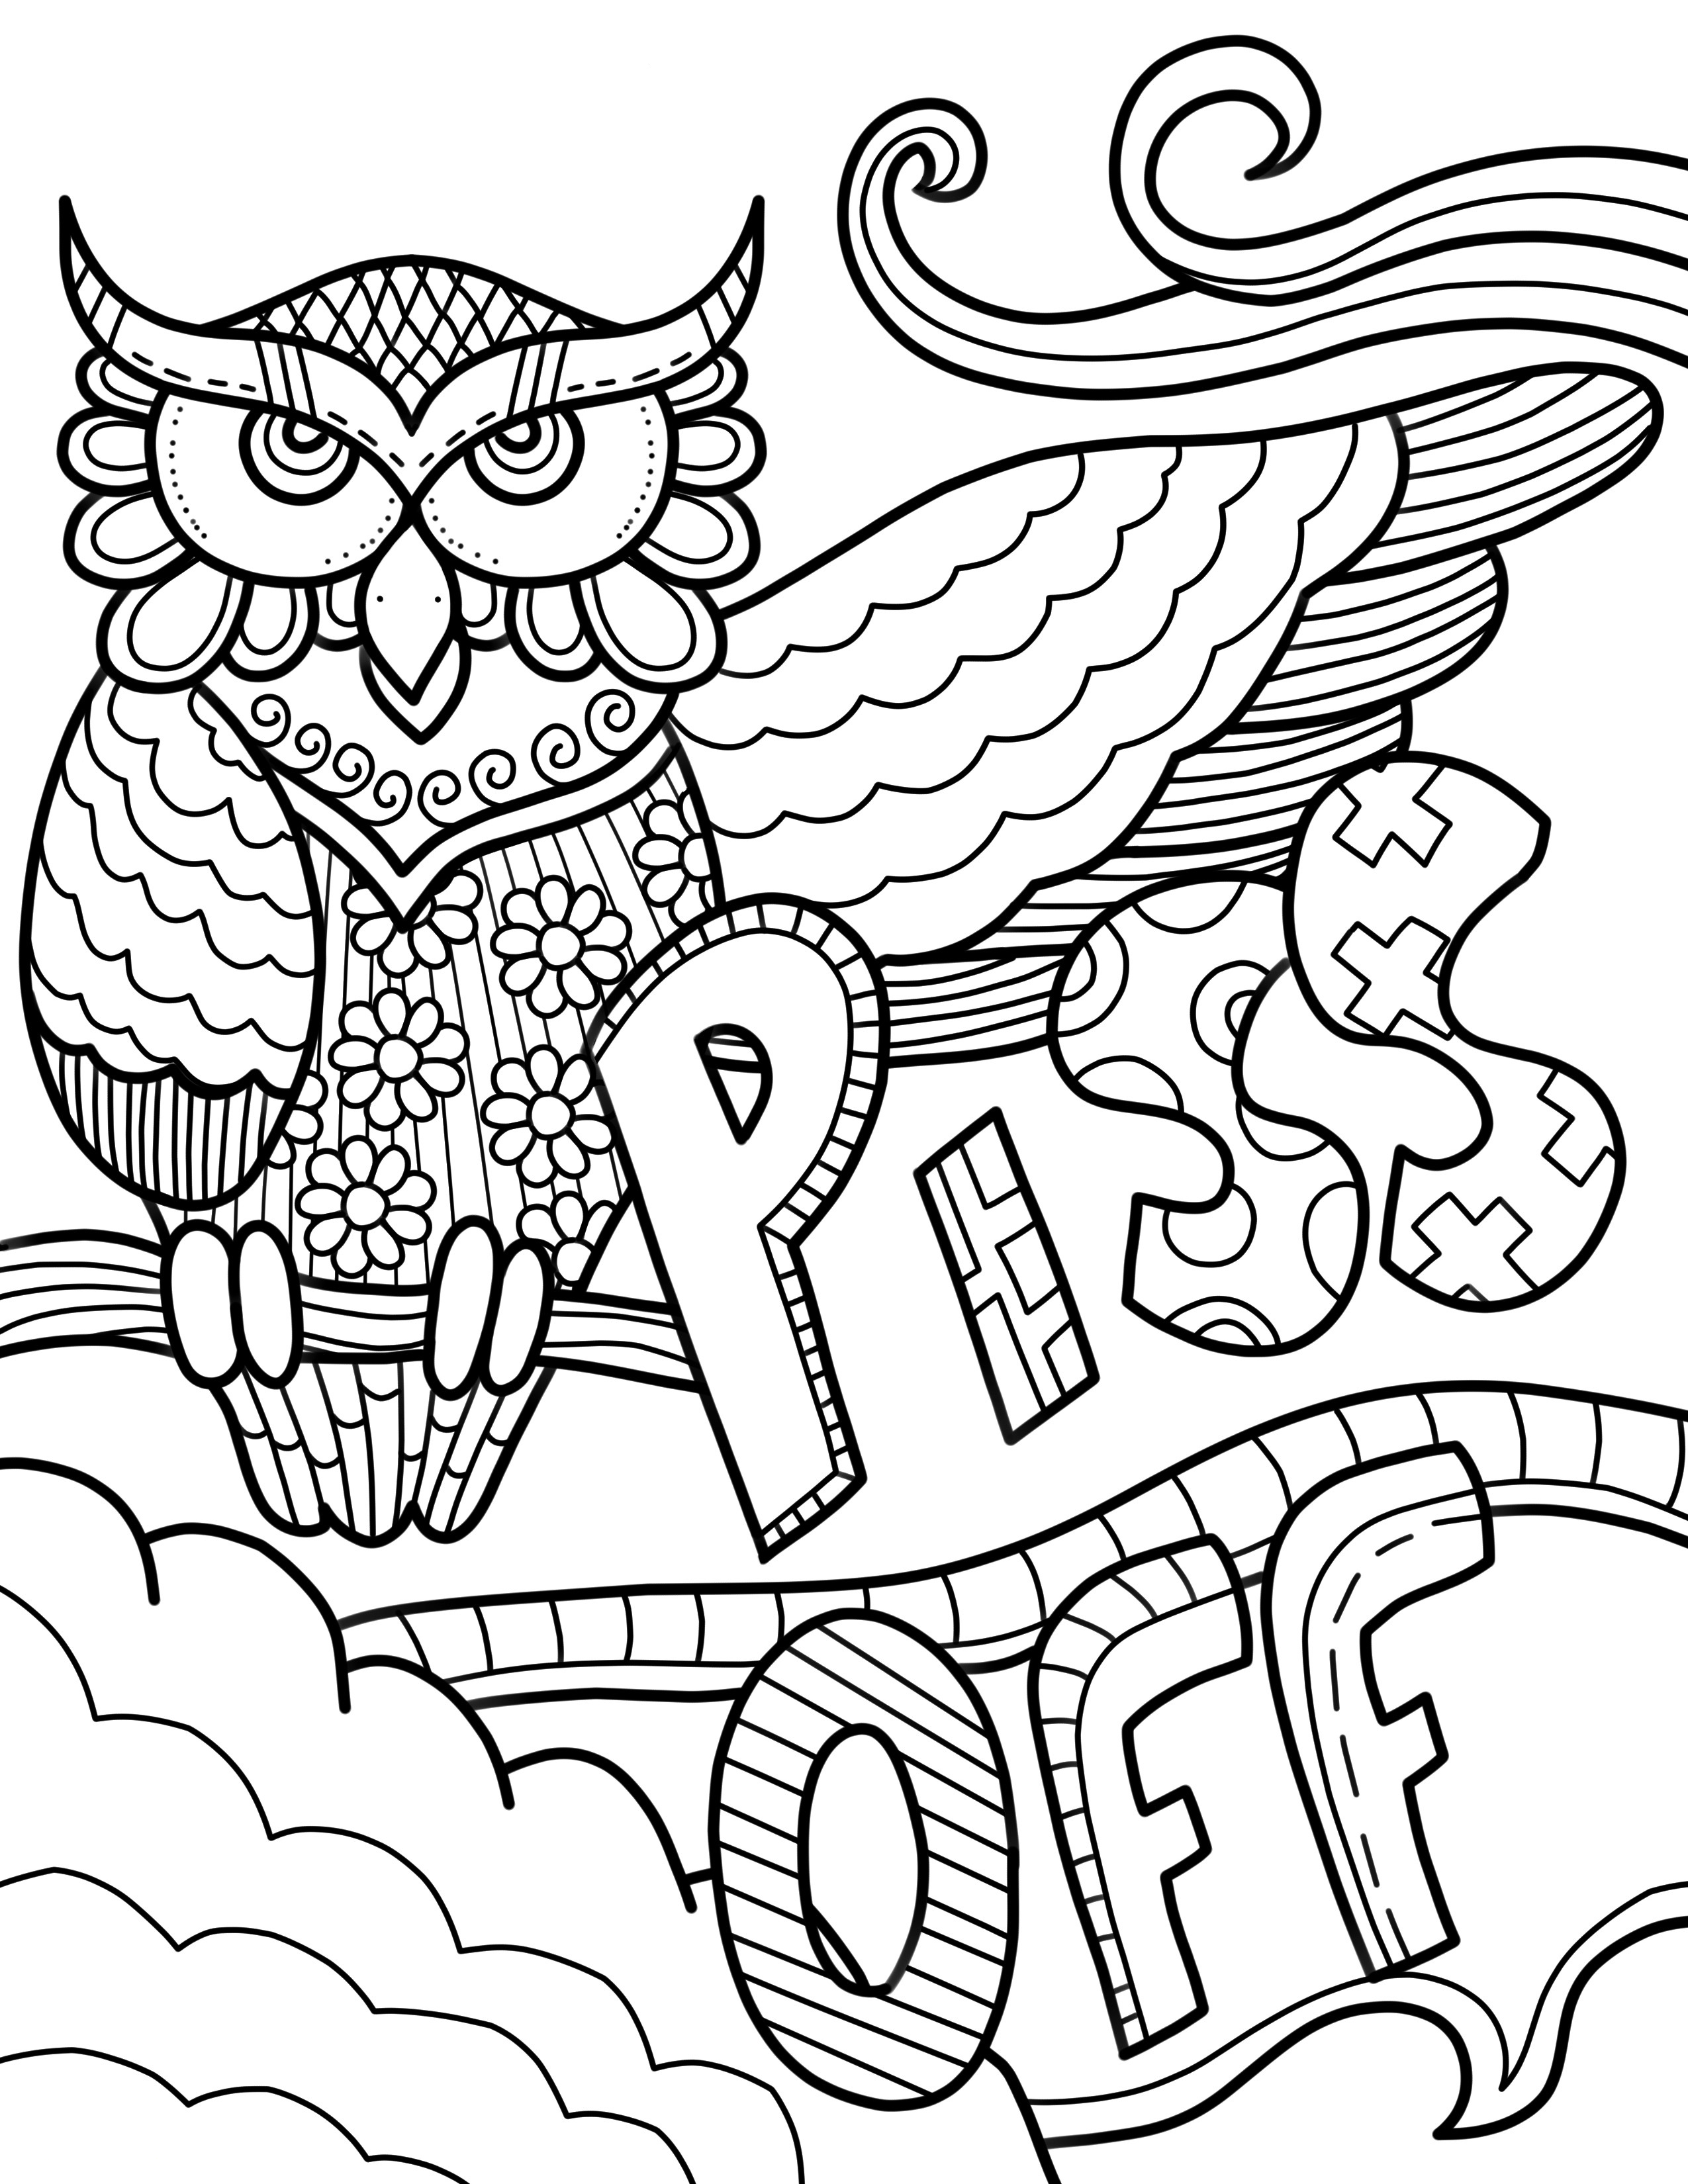 Adult Curse Word Coloring Coloring Pages